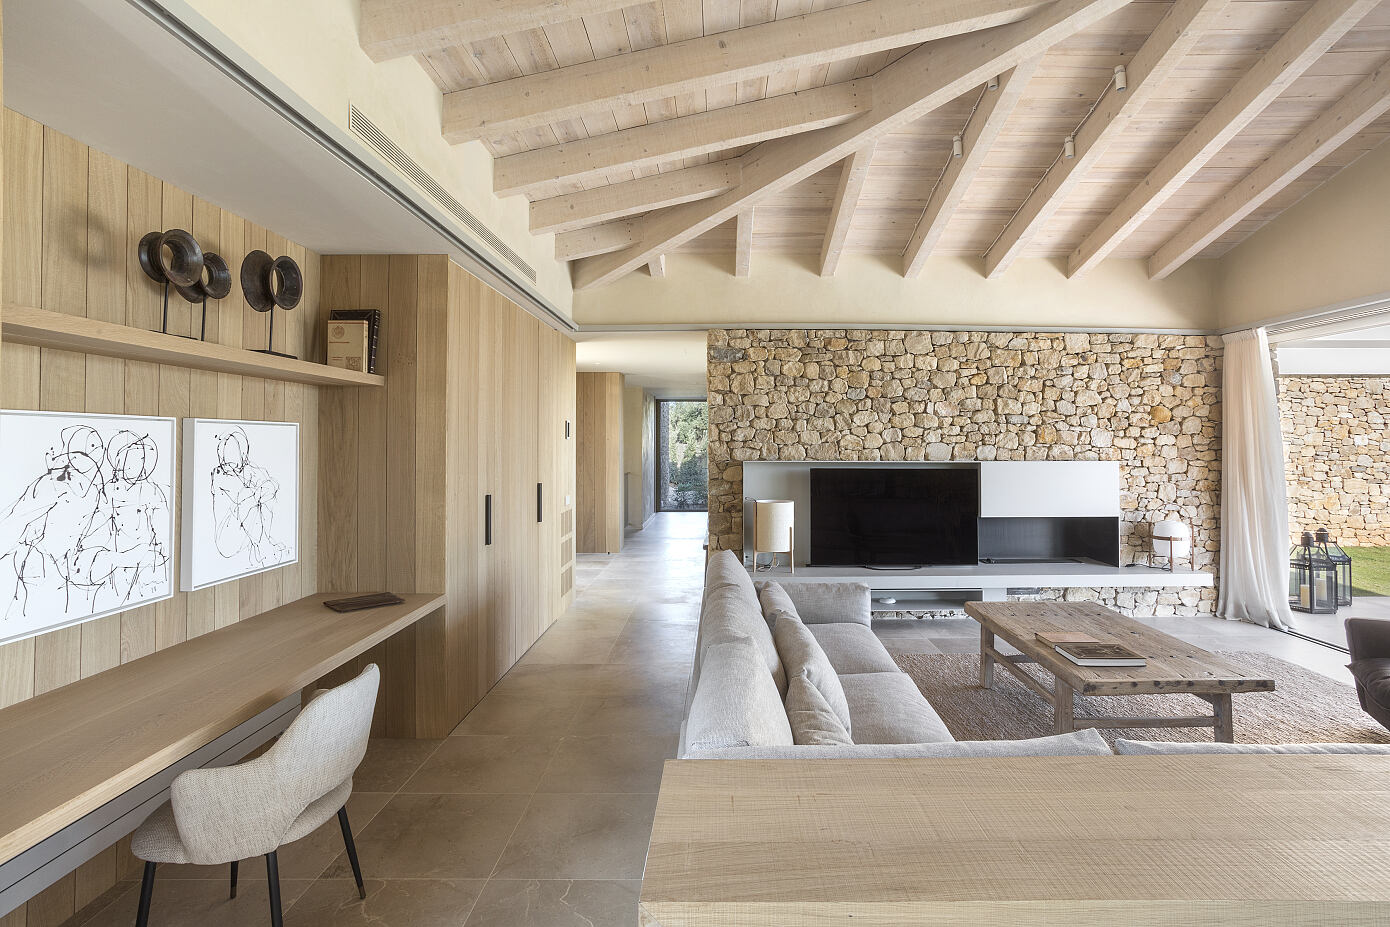 Single Family House in Montras by Dom Arquitectura